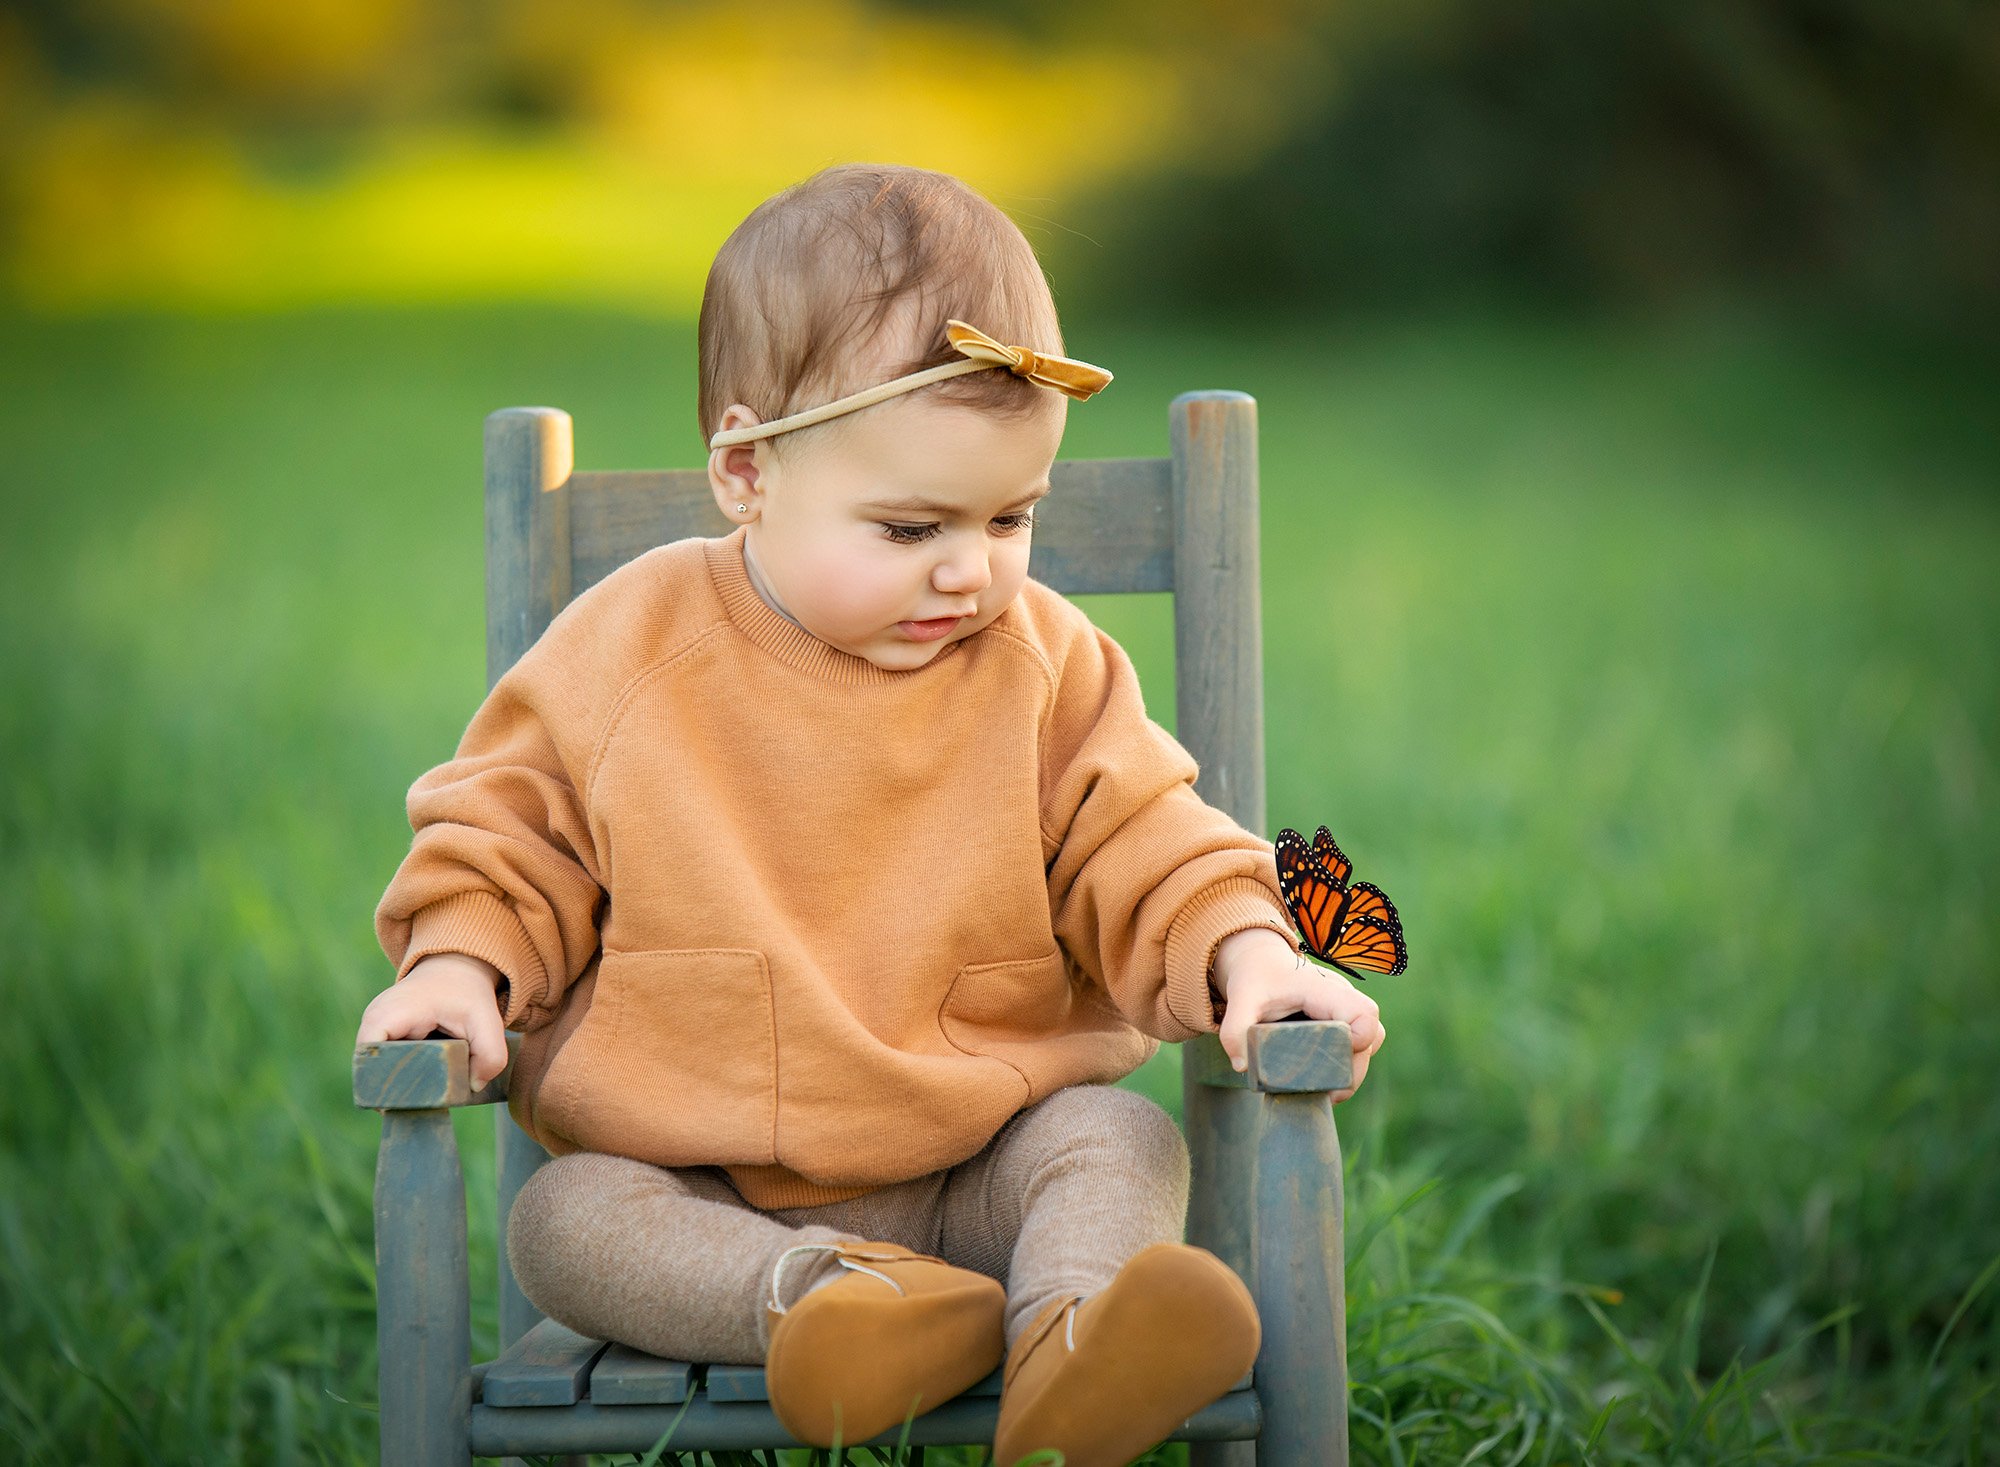 toddler girl sitting in rustic chair with orange butterfly sitting on her hand